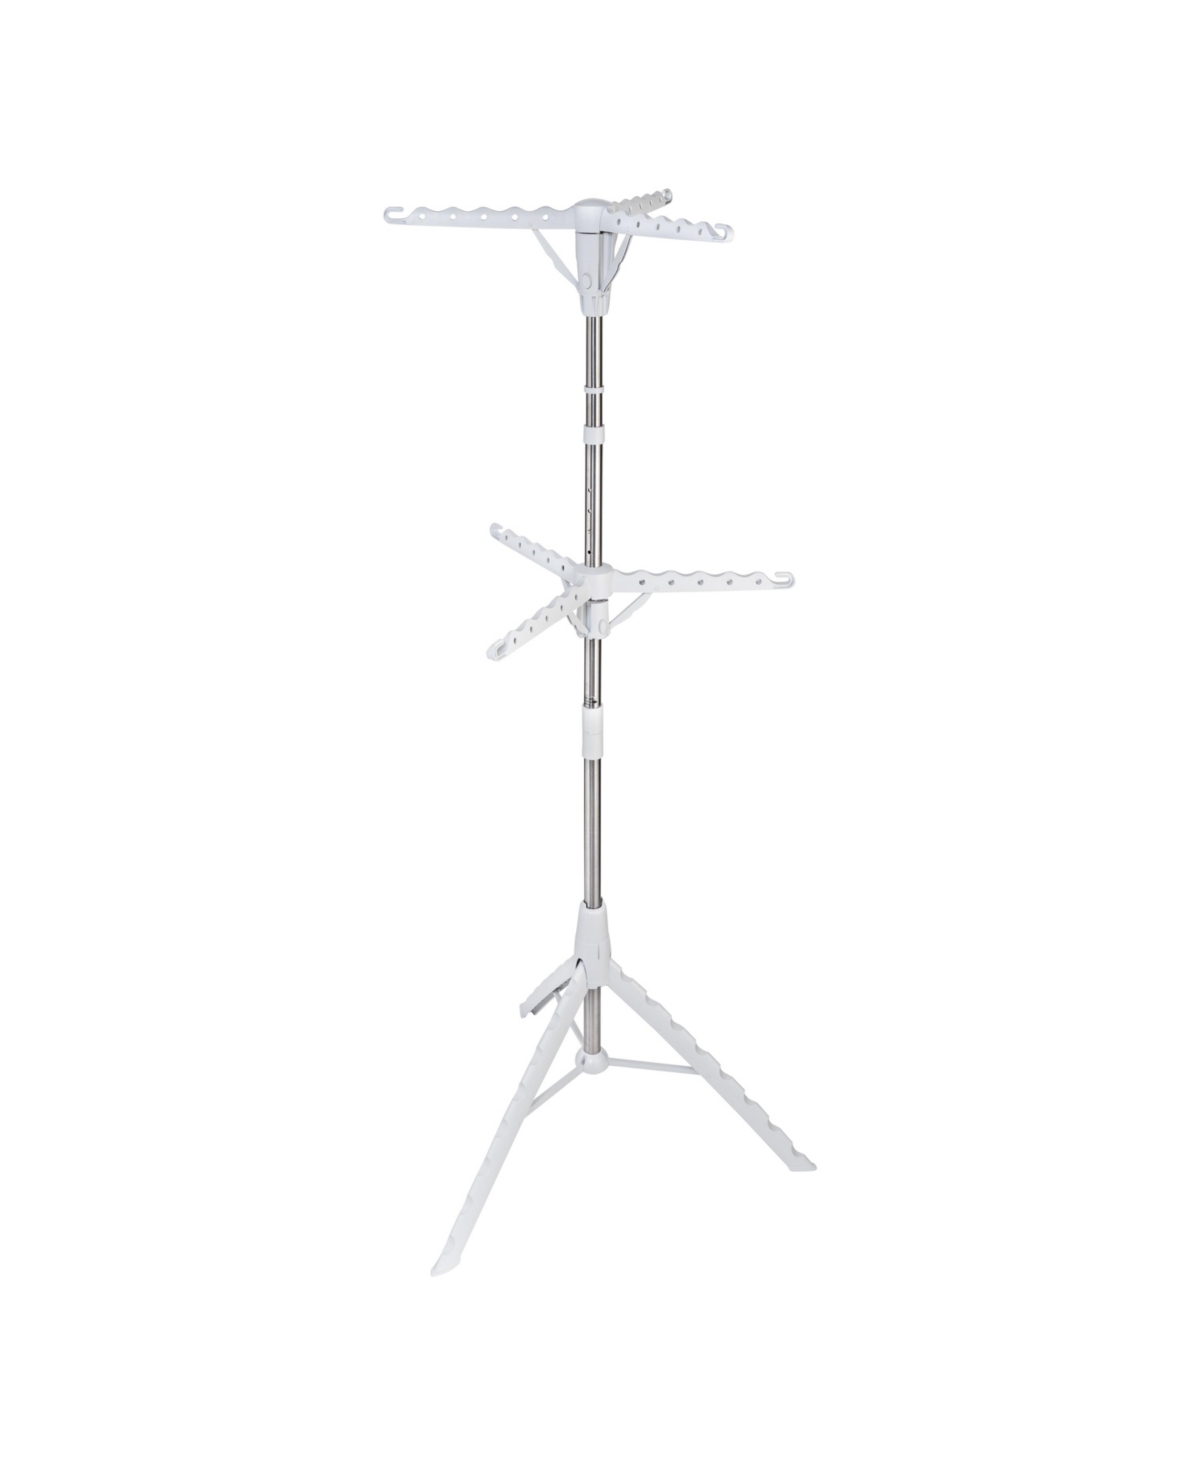 Tripod 2 Tier Clothes Drying Rack - White